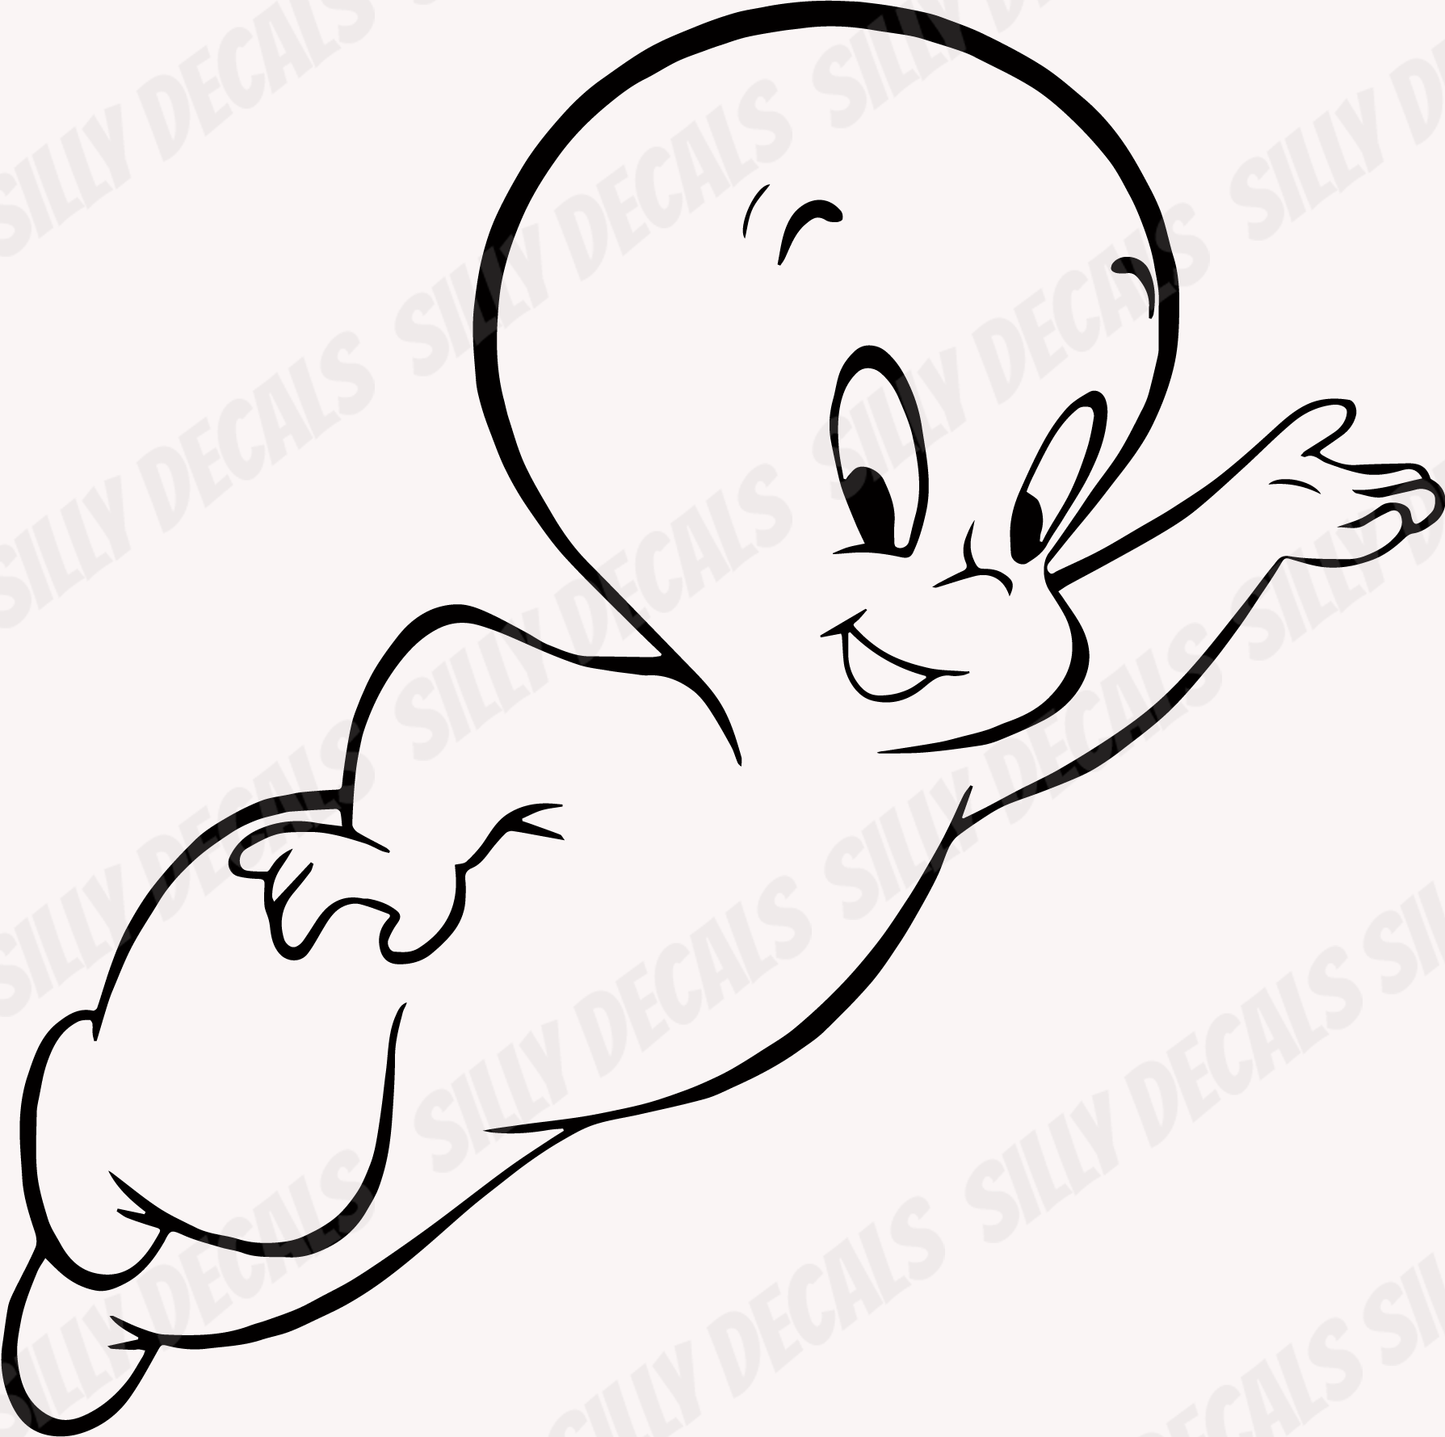 Happy Ghost; Spooky Halloween Vinyl Decals Suitable For Cars, Windows, Walls, and More!